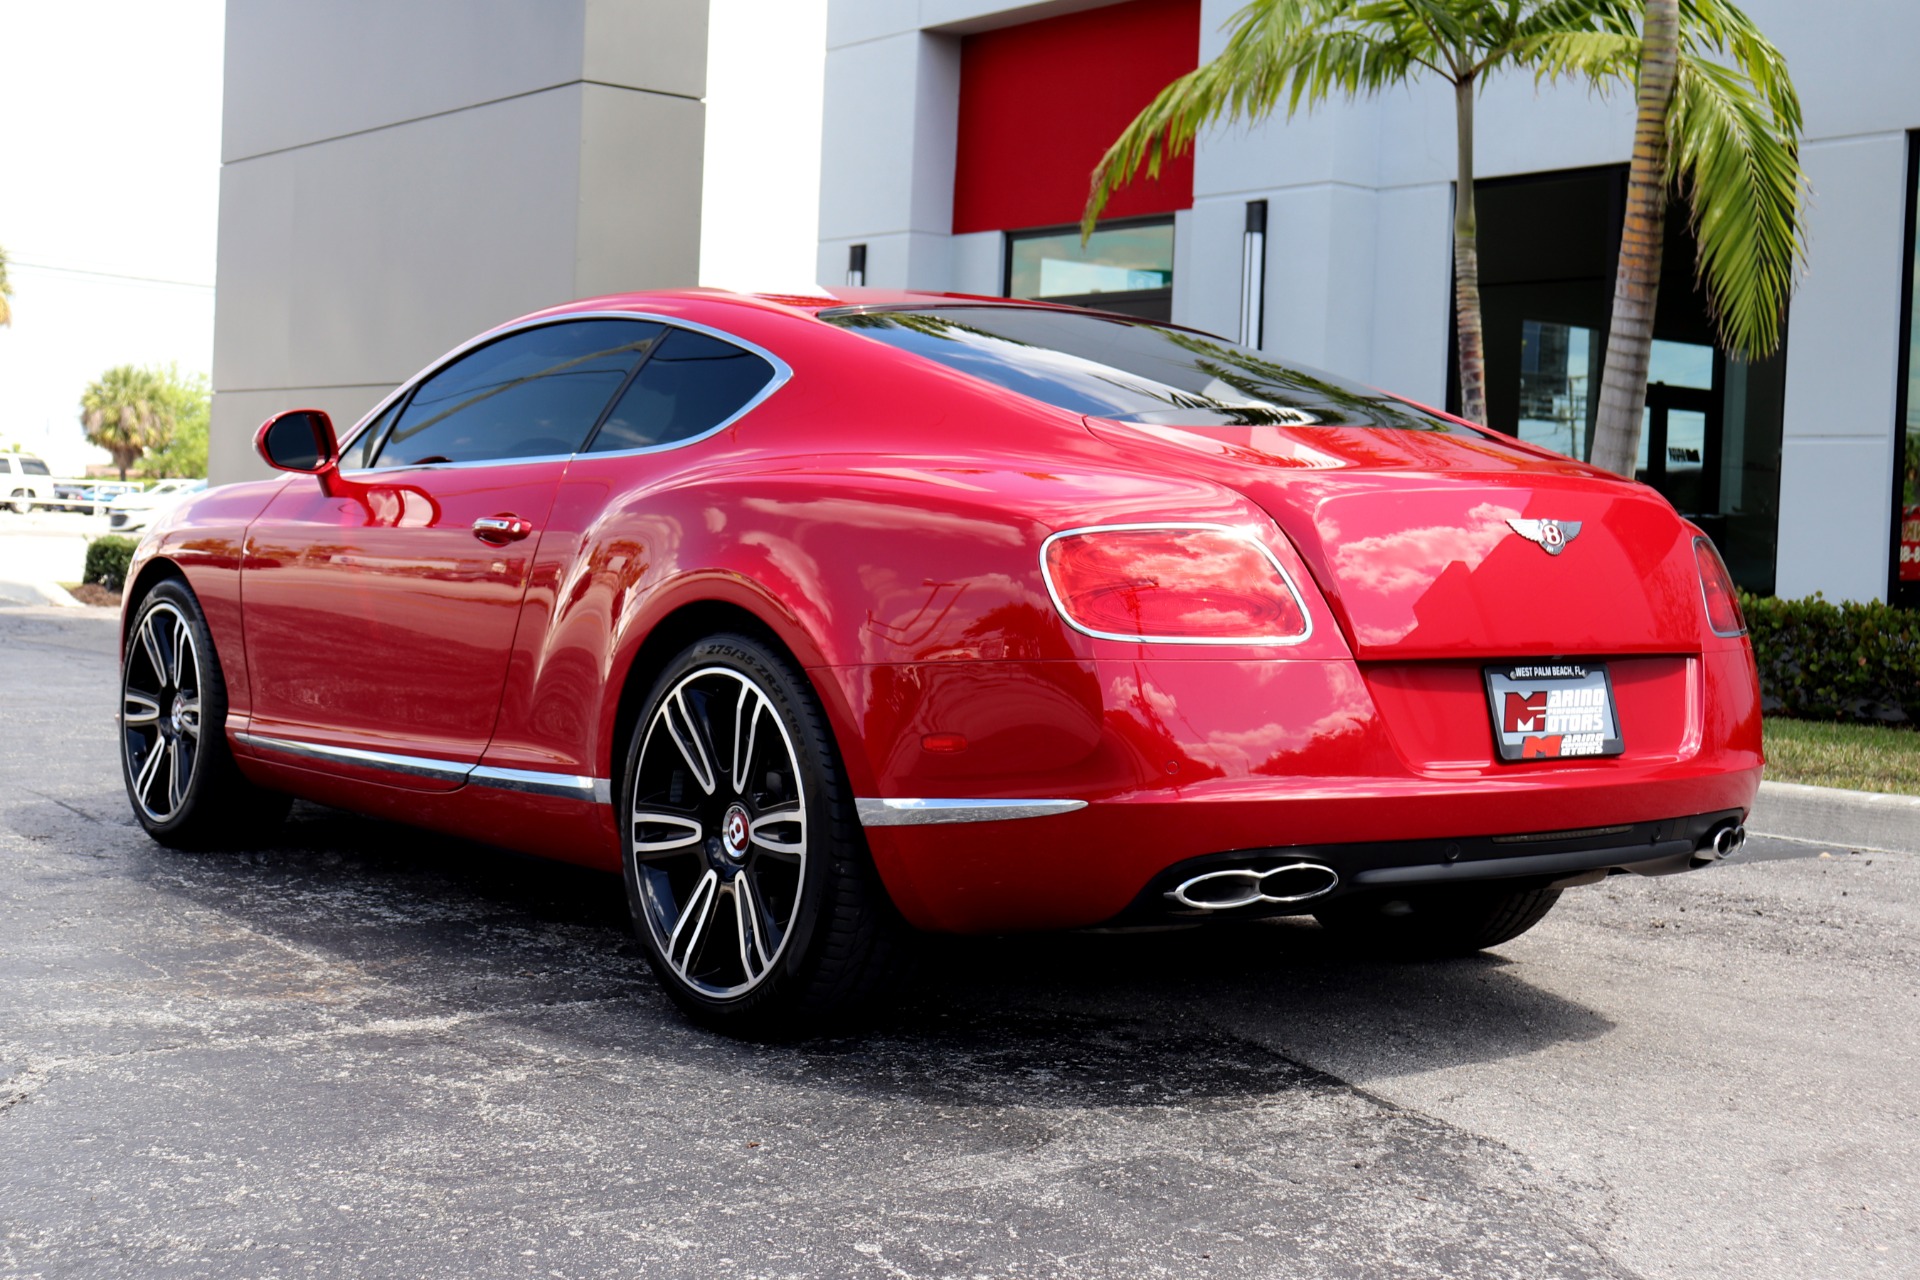 Used 2013 Bentley Continental GT V8 For Sale ($84,900) Marino Performance Motors Stock #083178